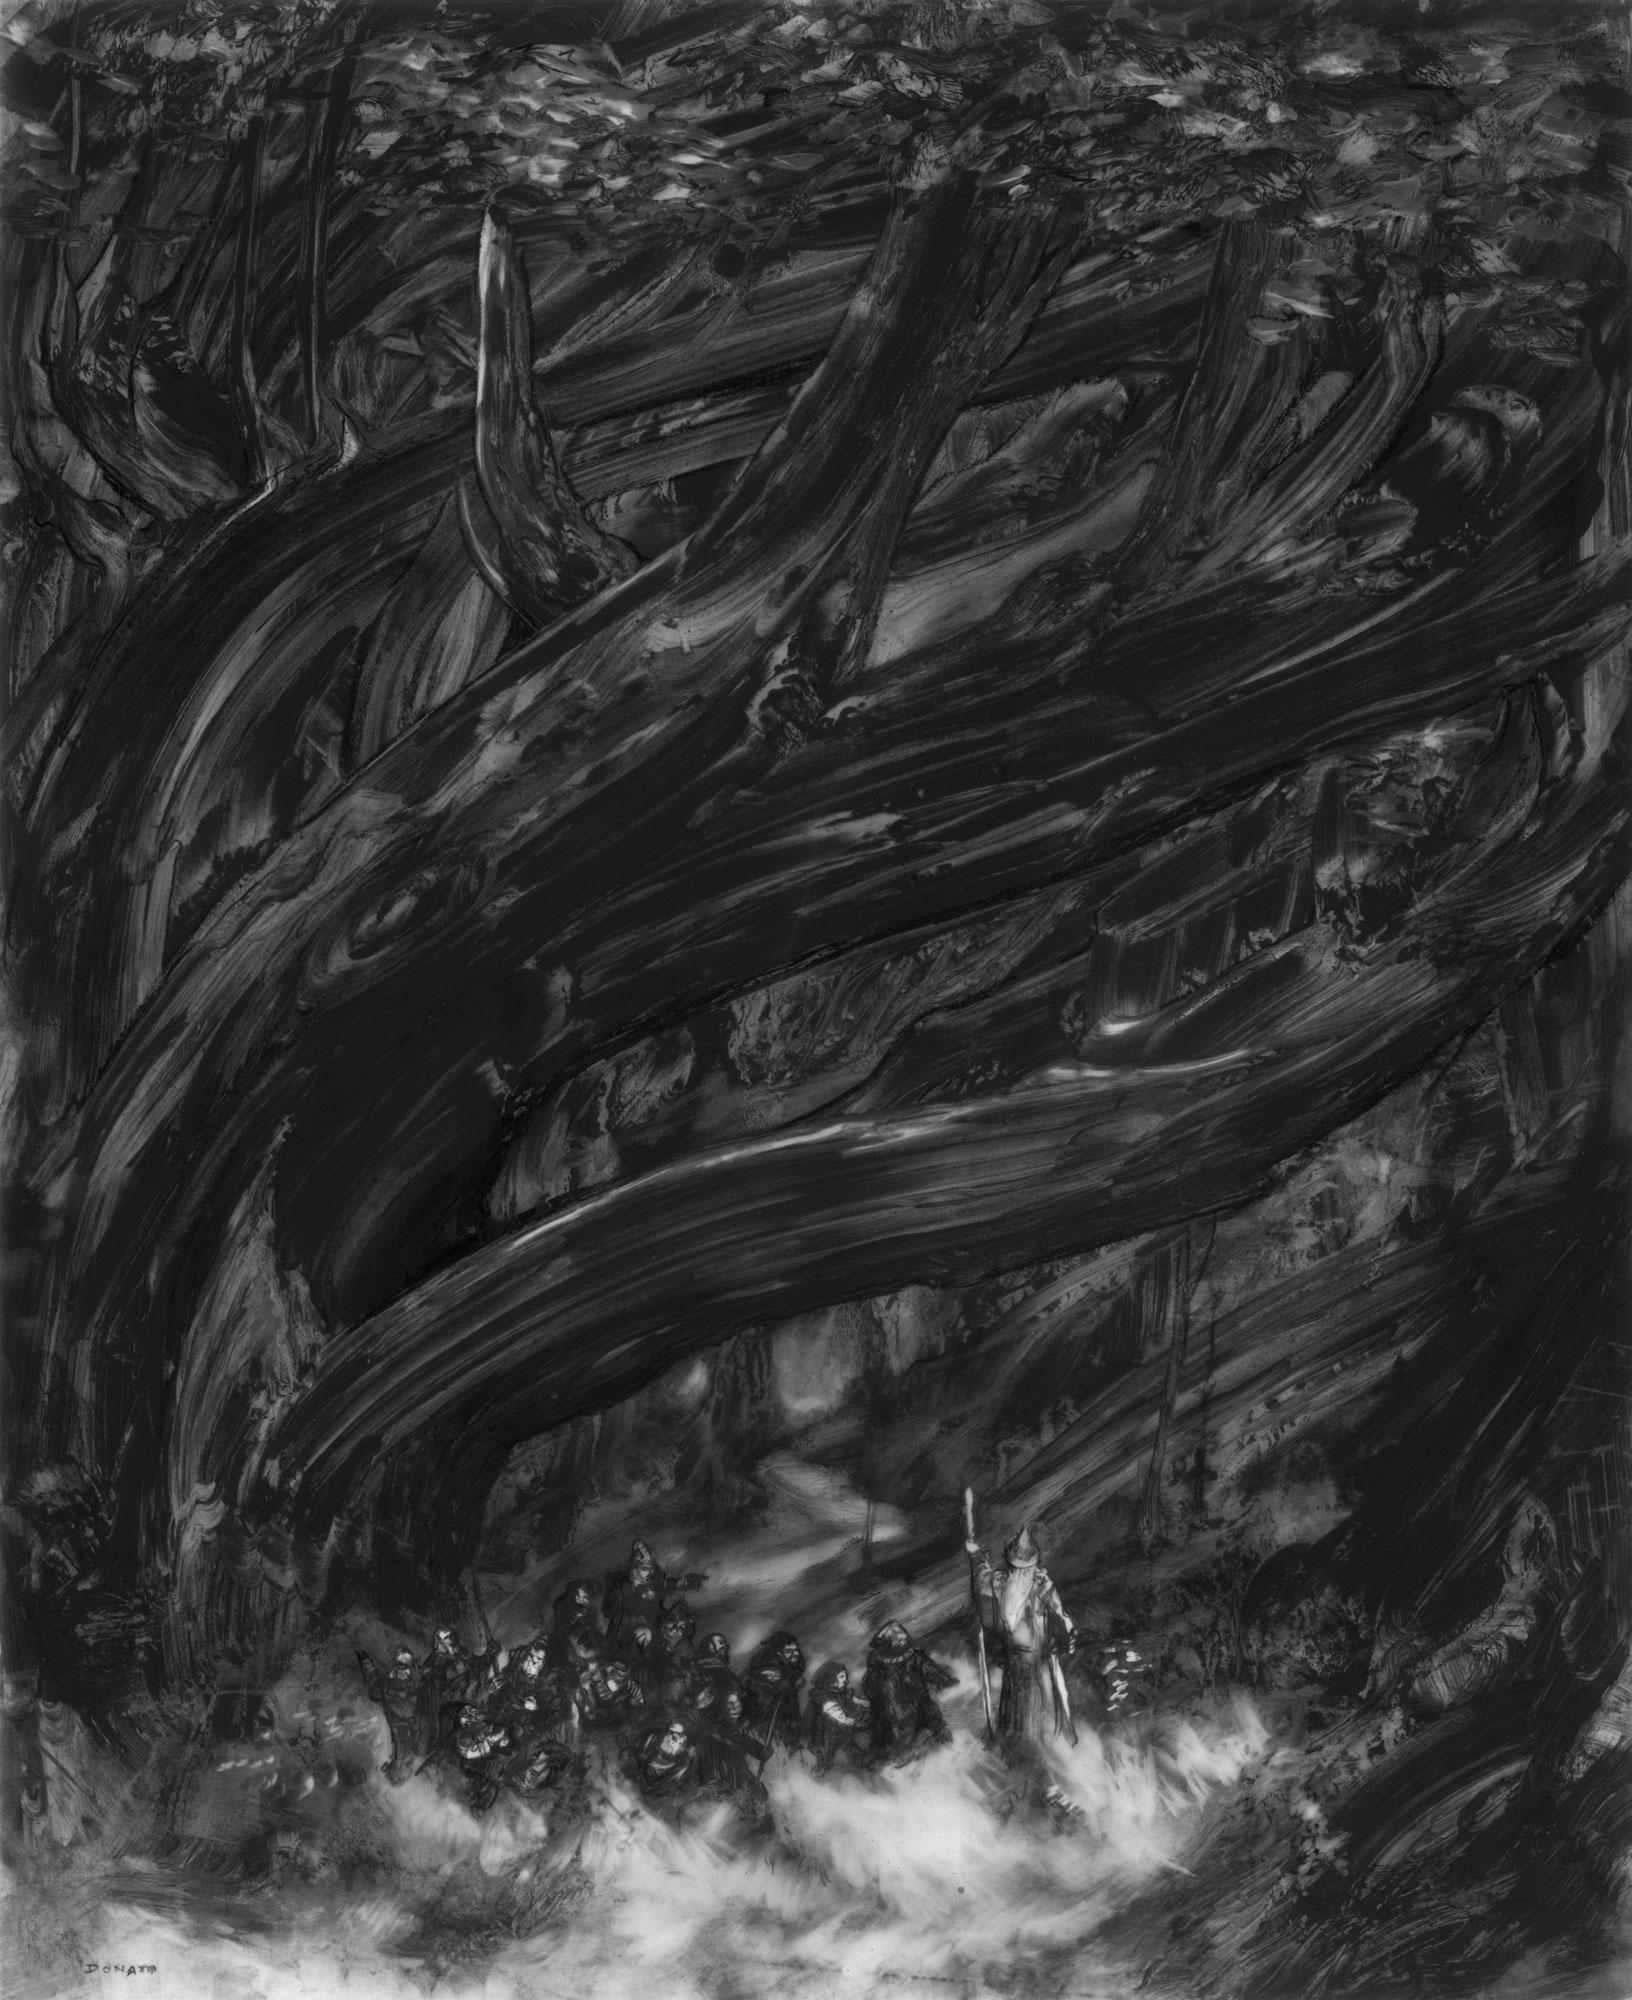 Edge of Mirkwood Forest
17" x 14" graphite pencil and paint 2019
collection of Joshua Patel